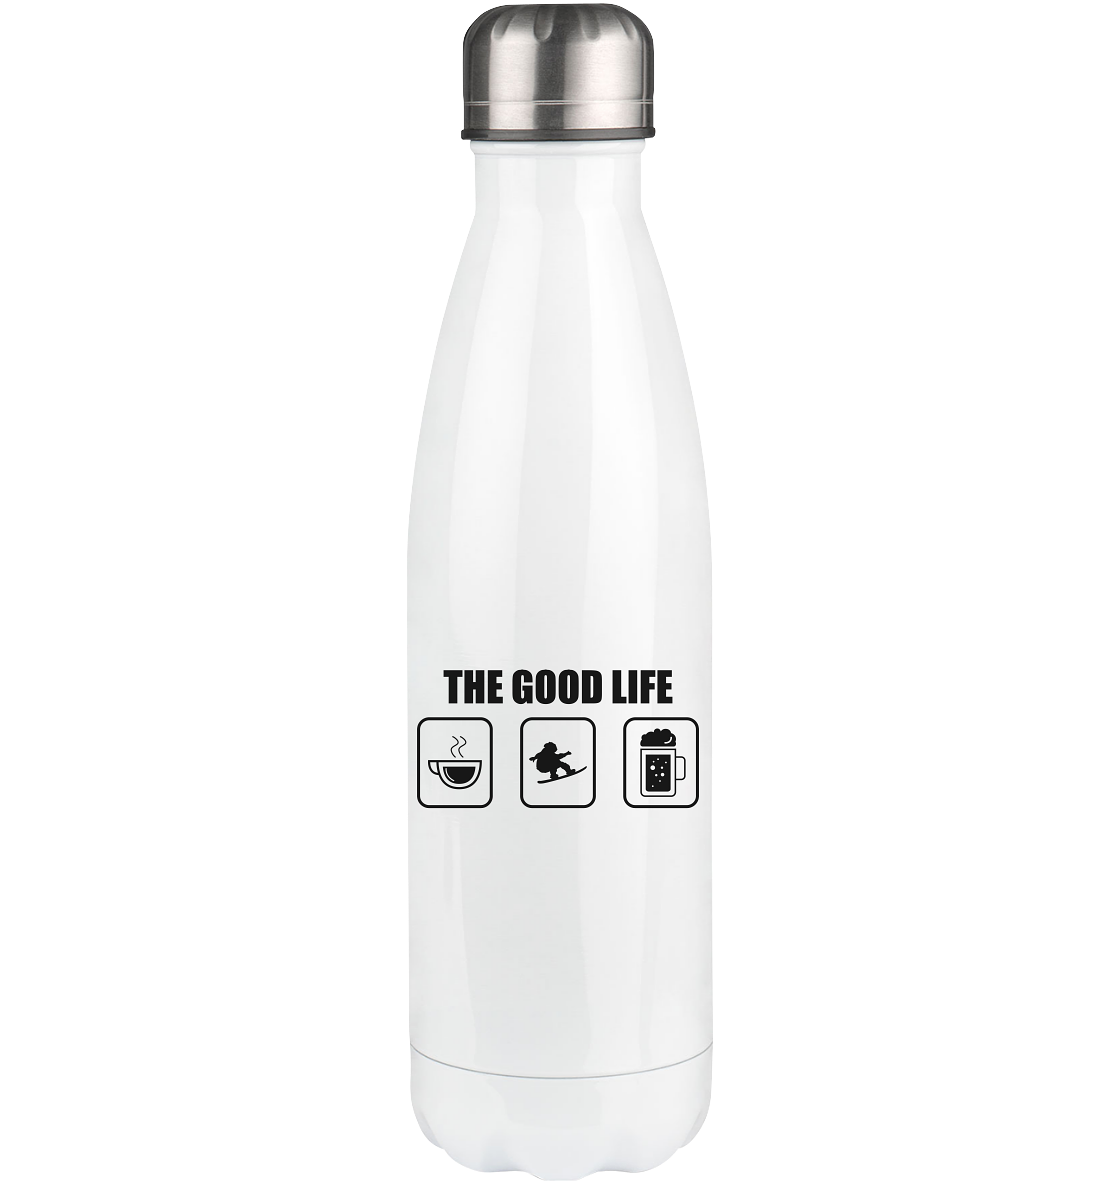 The Good Life - Edelstahl Thermosflasche snowboarden 500ml